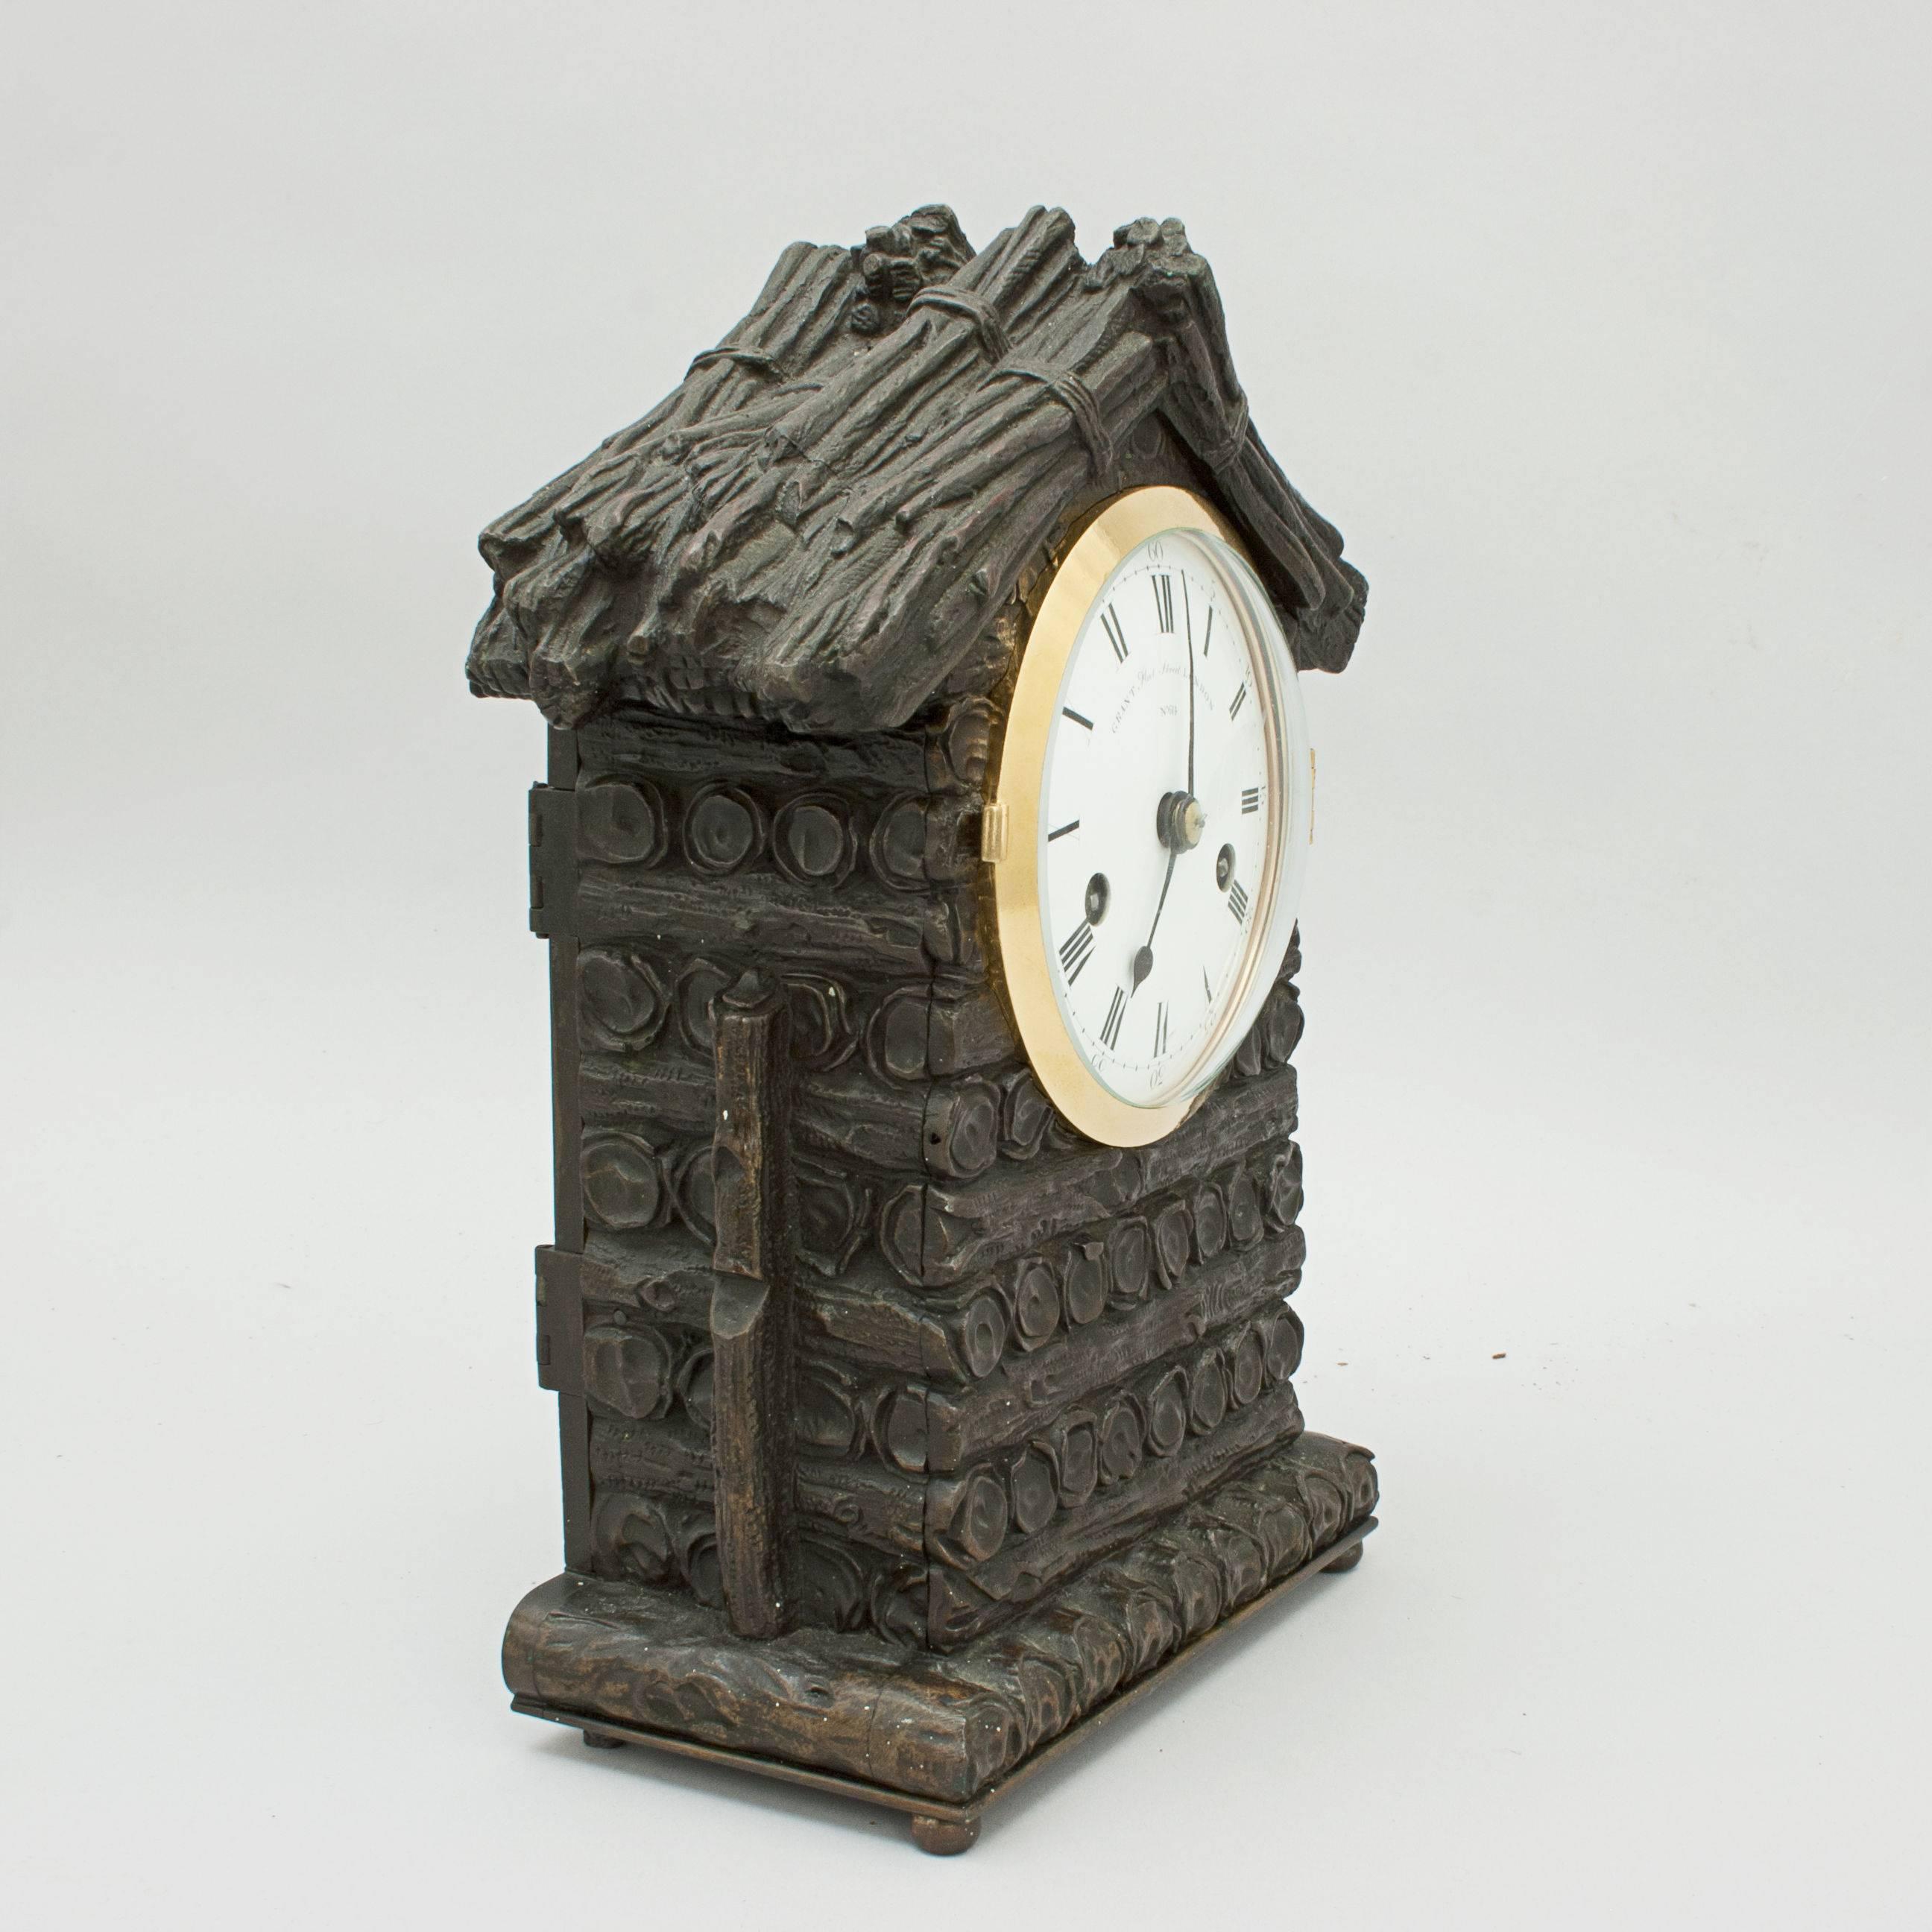 Early 19th Century Antique Mantel Clock by Grant, Black Forest Type Design For Sale